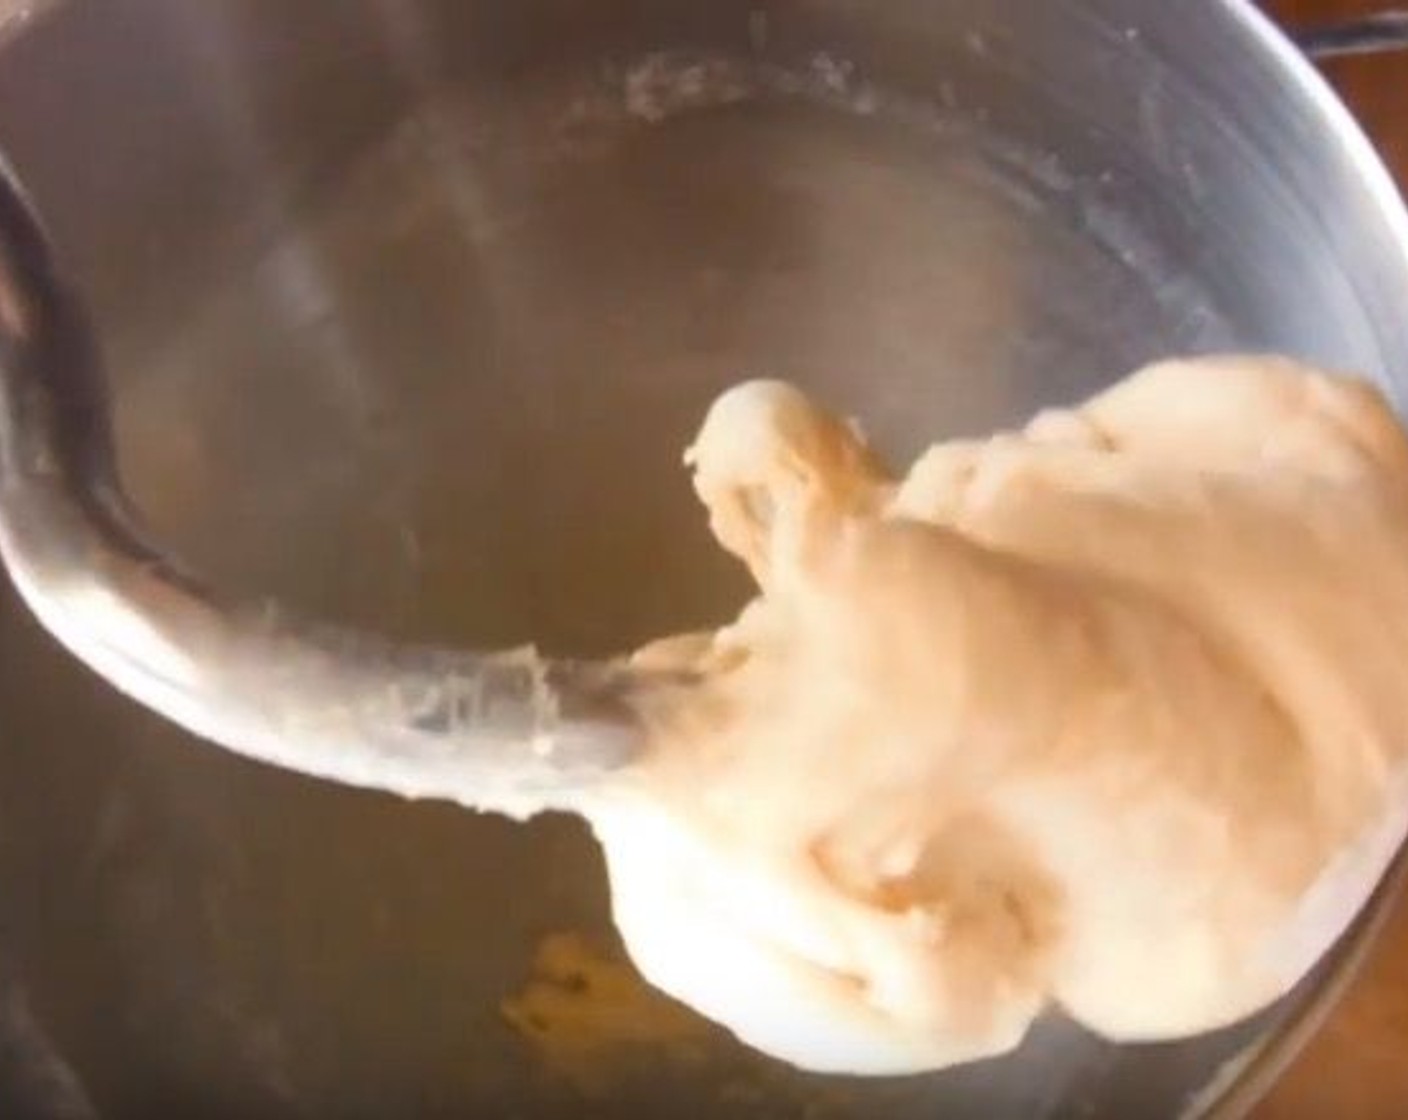 step 1 Into the bowl of a stand mixer fitted with a dough hook, add All-Purpose Flour (1 cup), 
Eggs (2), and Salt (1/2 tsp). Knead for 6 minutes.